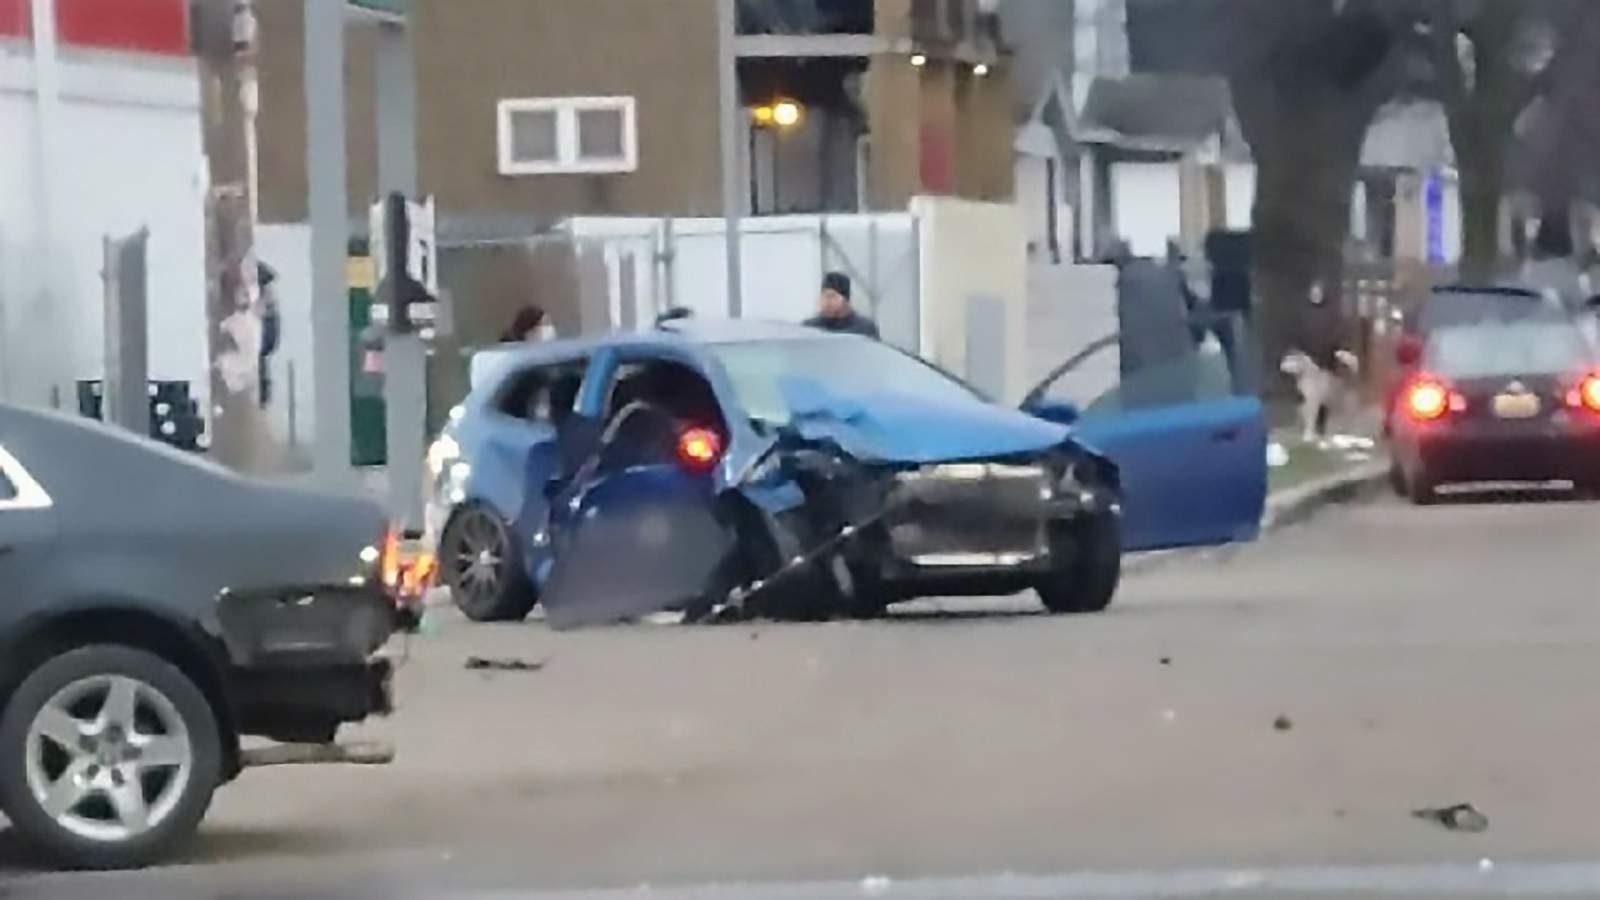 Detroit father seriously injured after drag racing vehicles crash into his car, family says